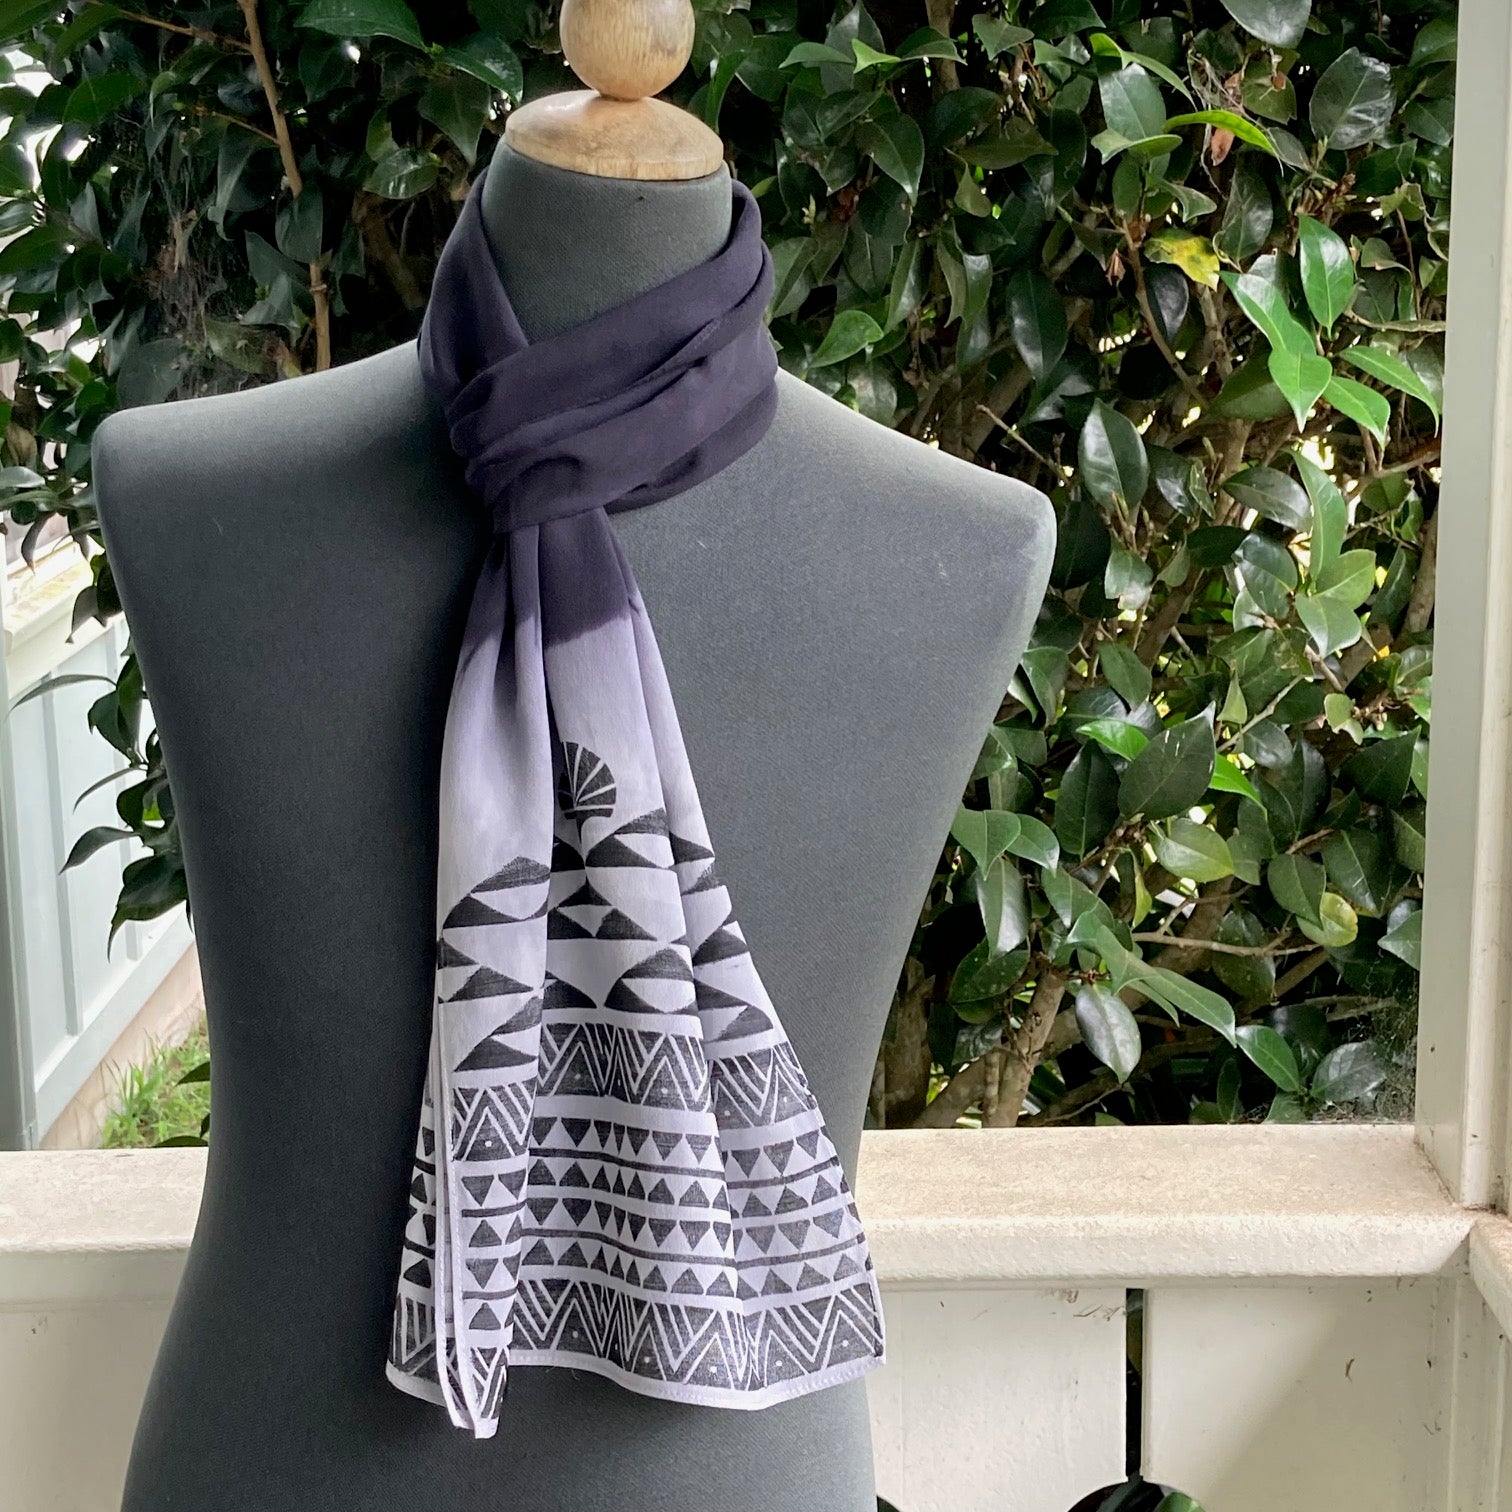 Ohe Kapala Silk Crepe Scarf in Black and White with Mauna and Lehua